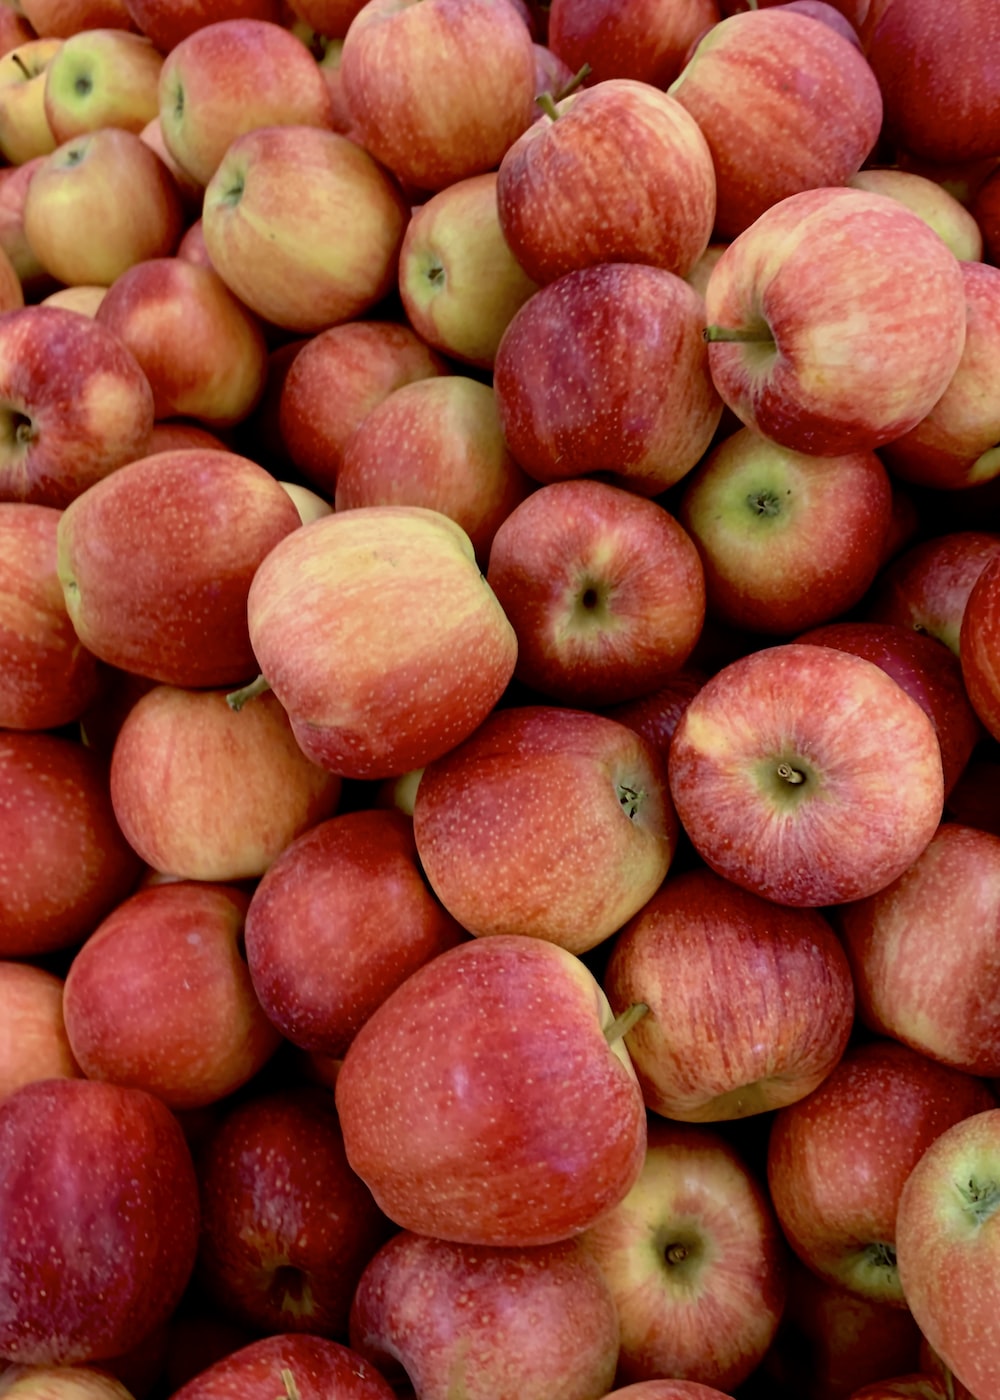 5 Benefits Of Apples You Should Know About